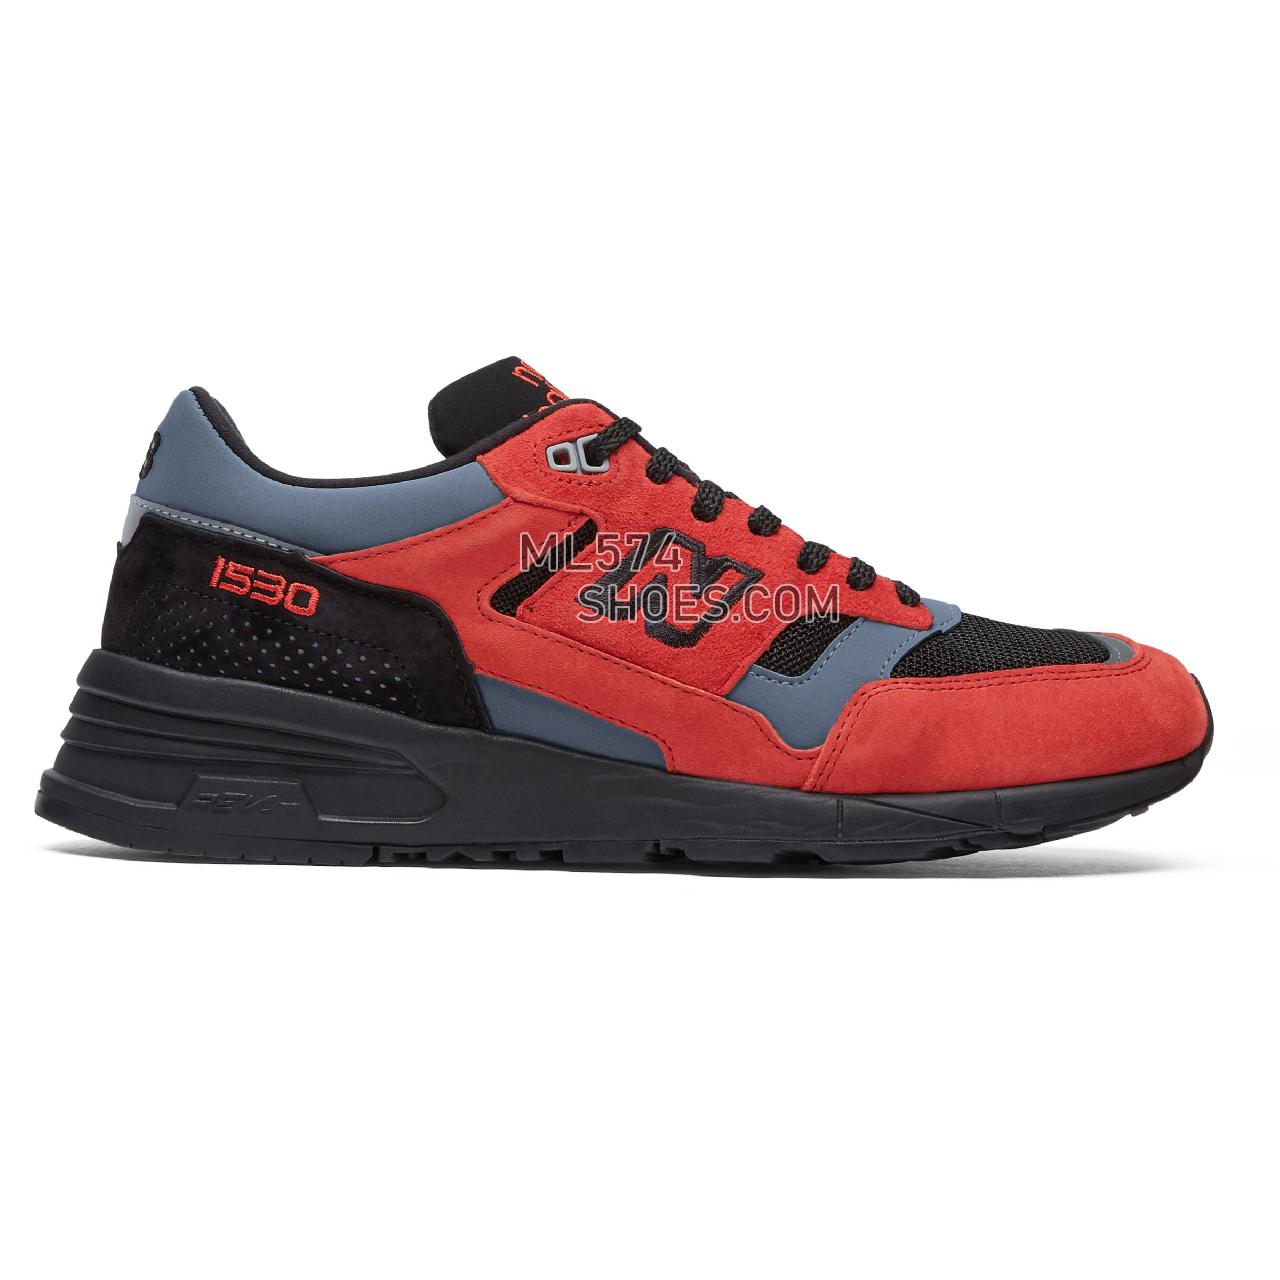 New Balance Made in UK 1530 - Men's Made in USA And UK Sneakers - Red with Black and Grey - M1530LA